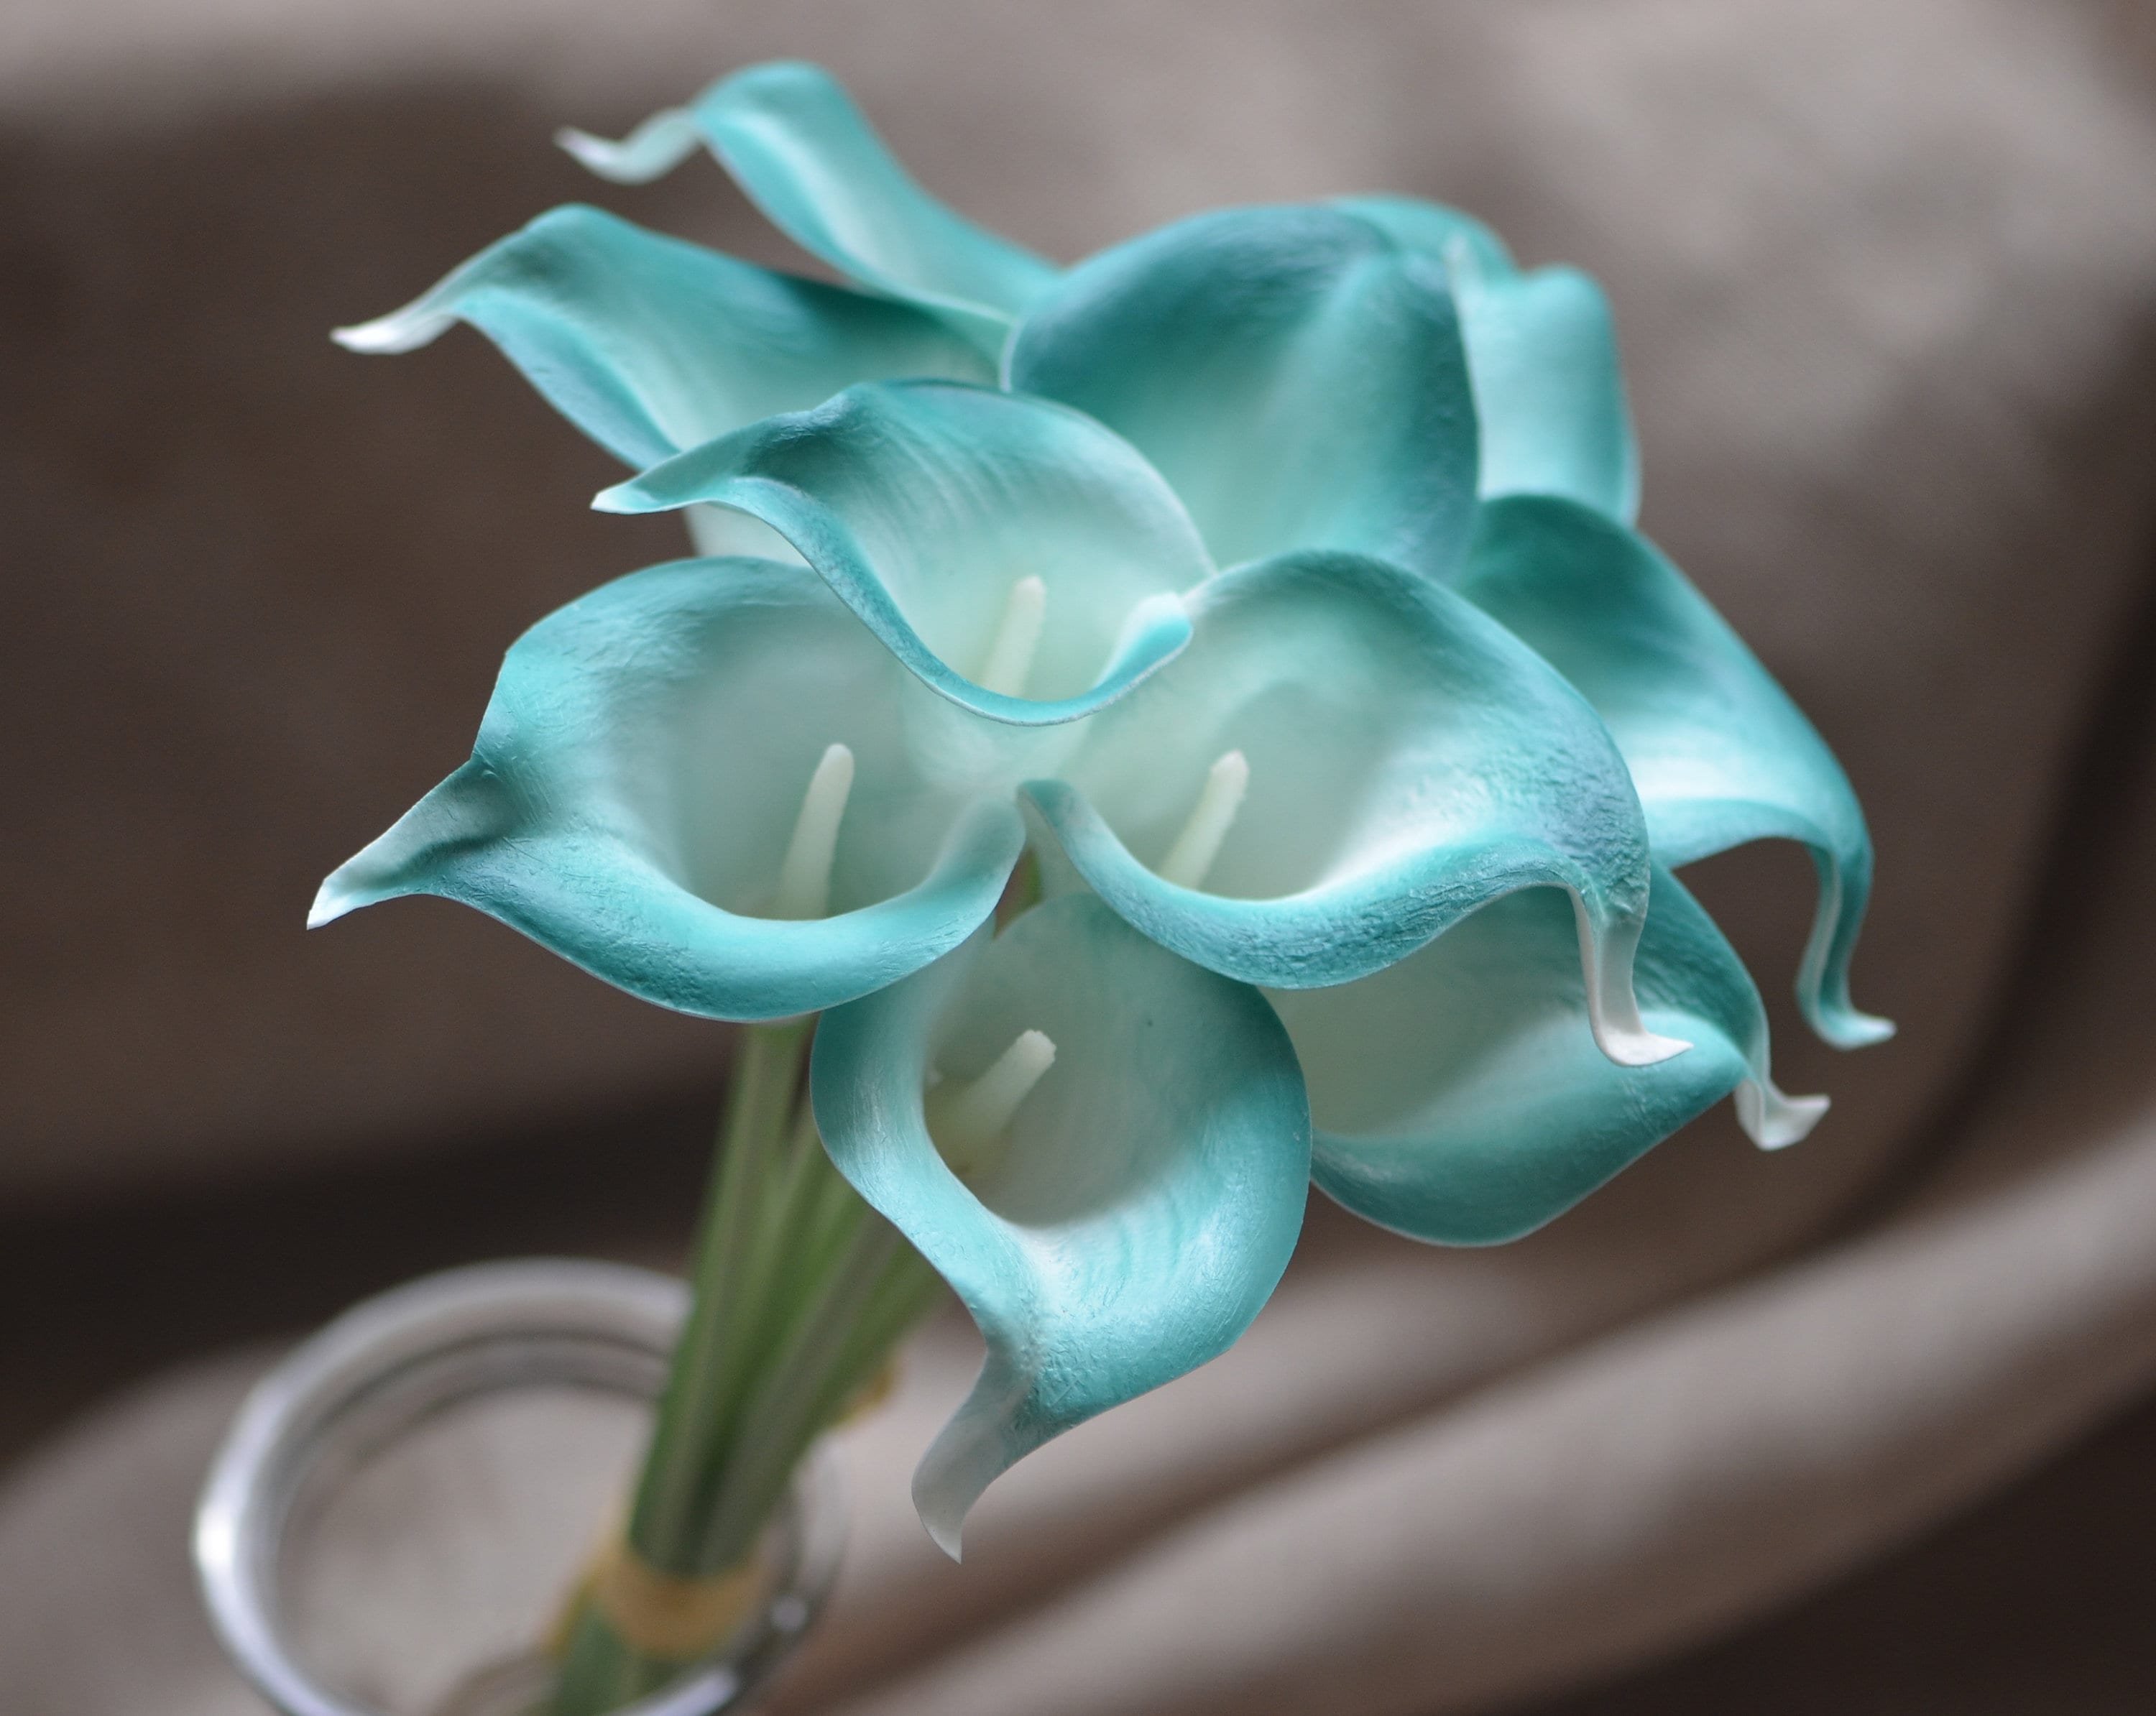 3x REAL TOUCH LATEX FLOWERS CALLA LILY LILIES WEDDING CREAM TEAL BUTTON HOLE 